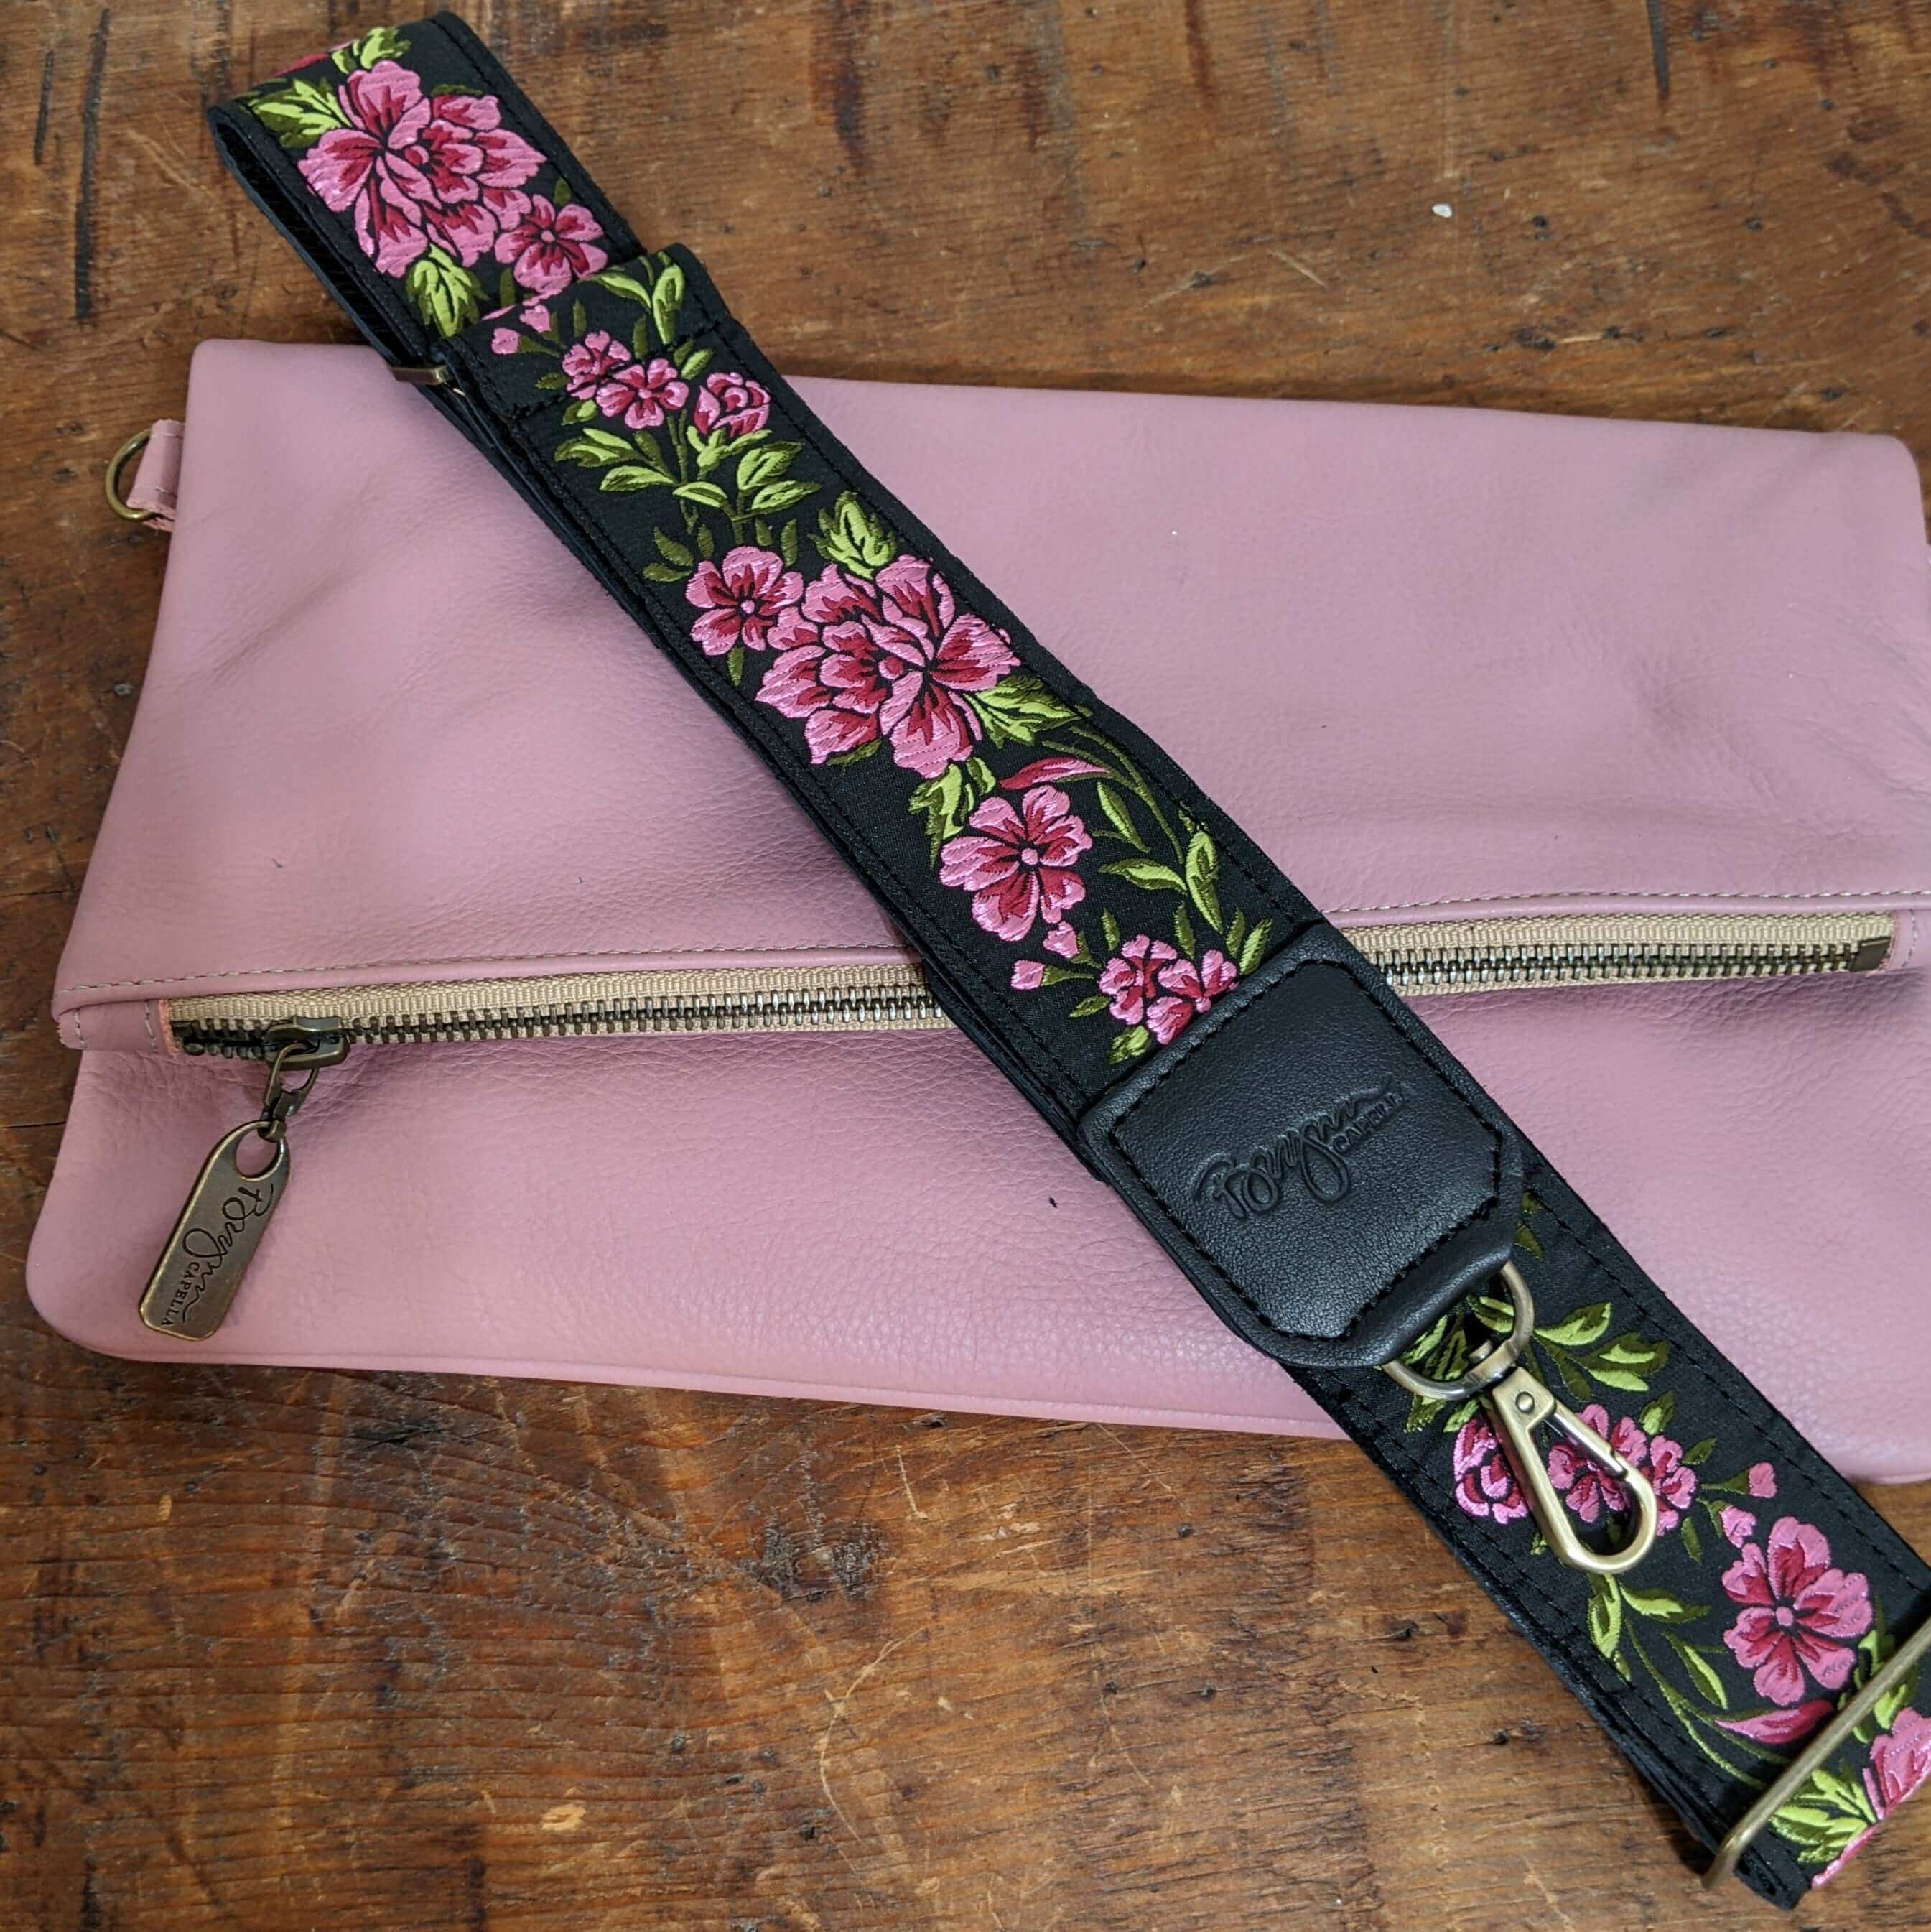 Givenchy Pink Patterned Purse Strap - Pink Bag Accessories, Accessories -  GIV138105 | The RealReal